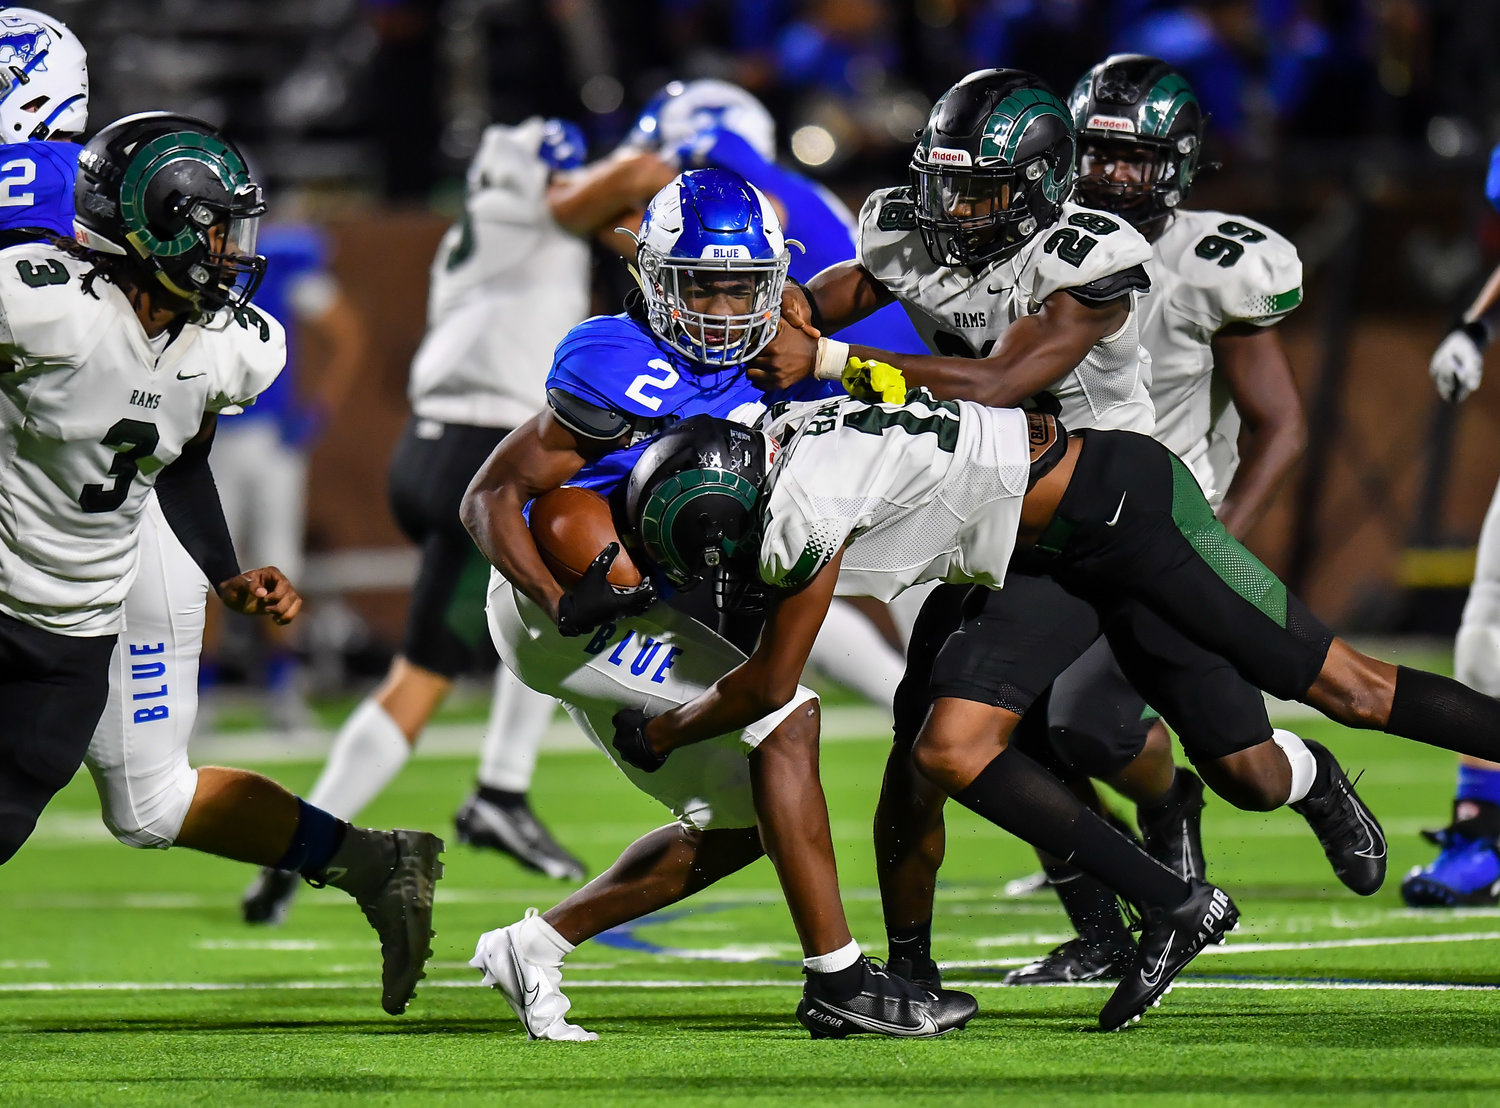 Katy, Tx. Oct 15, 2021:  Katy Taylors Michael Whitaker iii #2  rushes for a first down before being brought down by Ram defenders during a conference game between Mayde Creek and Katy Taylor at Rhodes Stadium. (Photo by Mark Goodman / Katy Times)